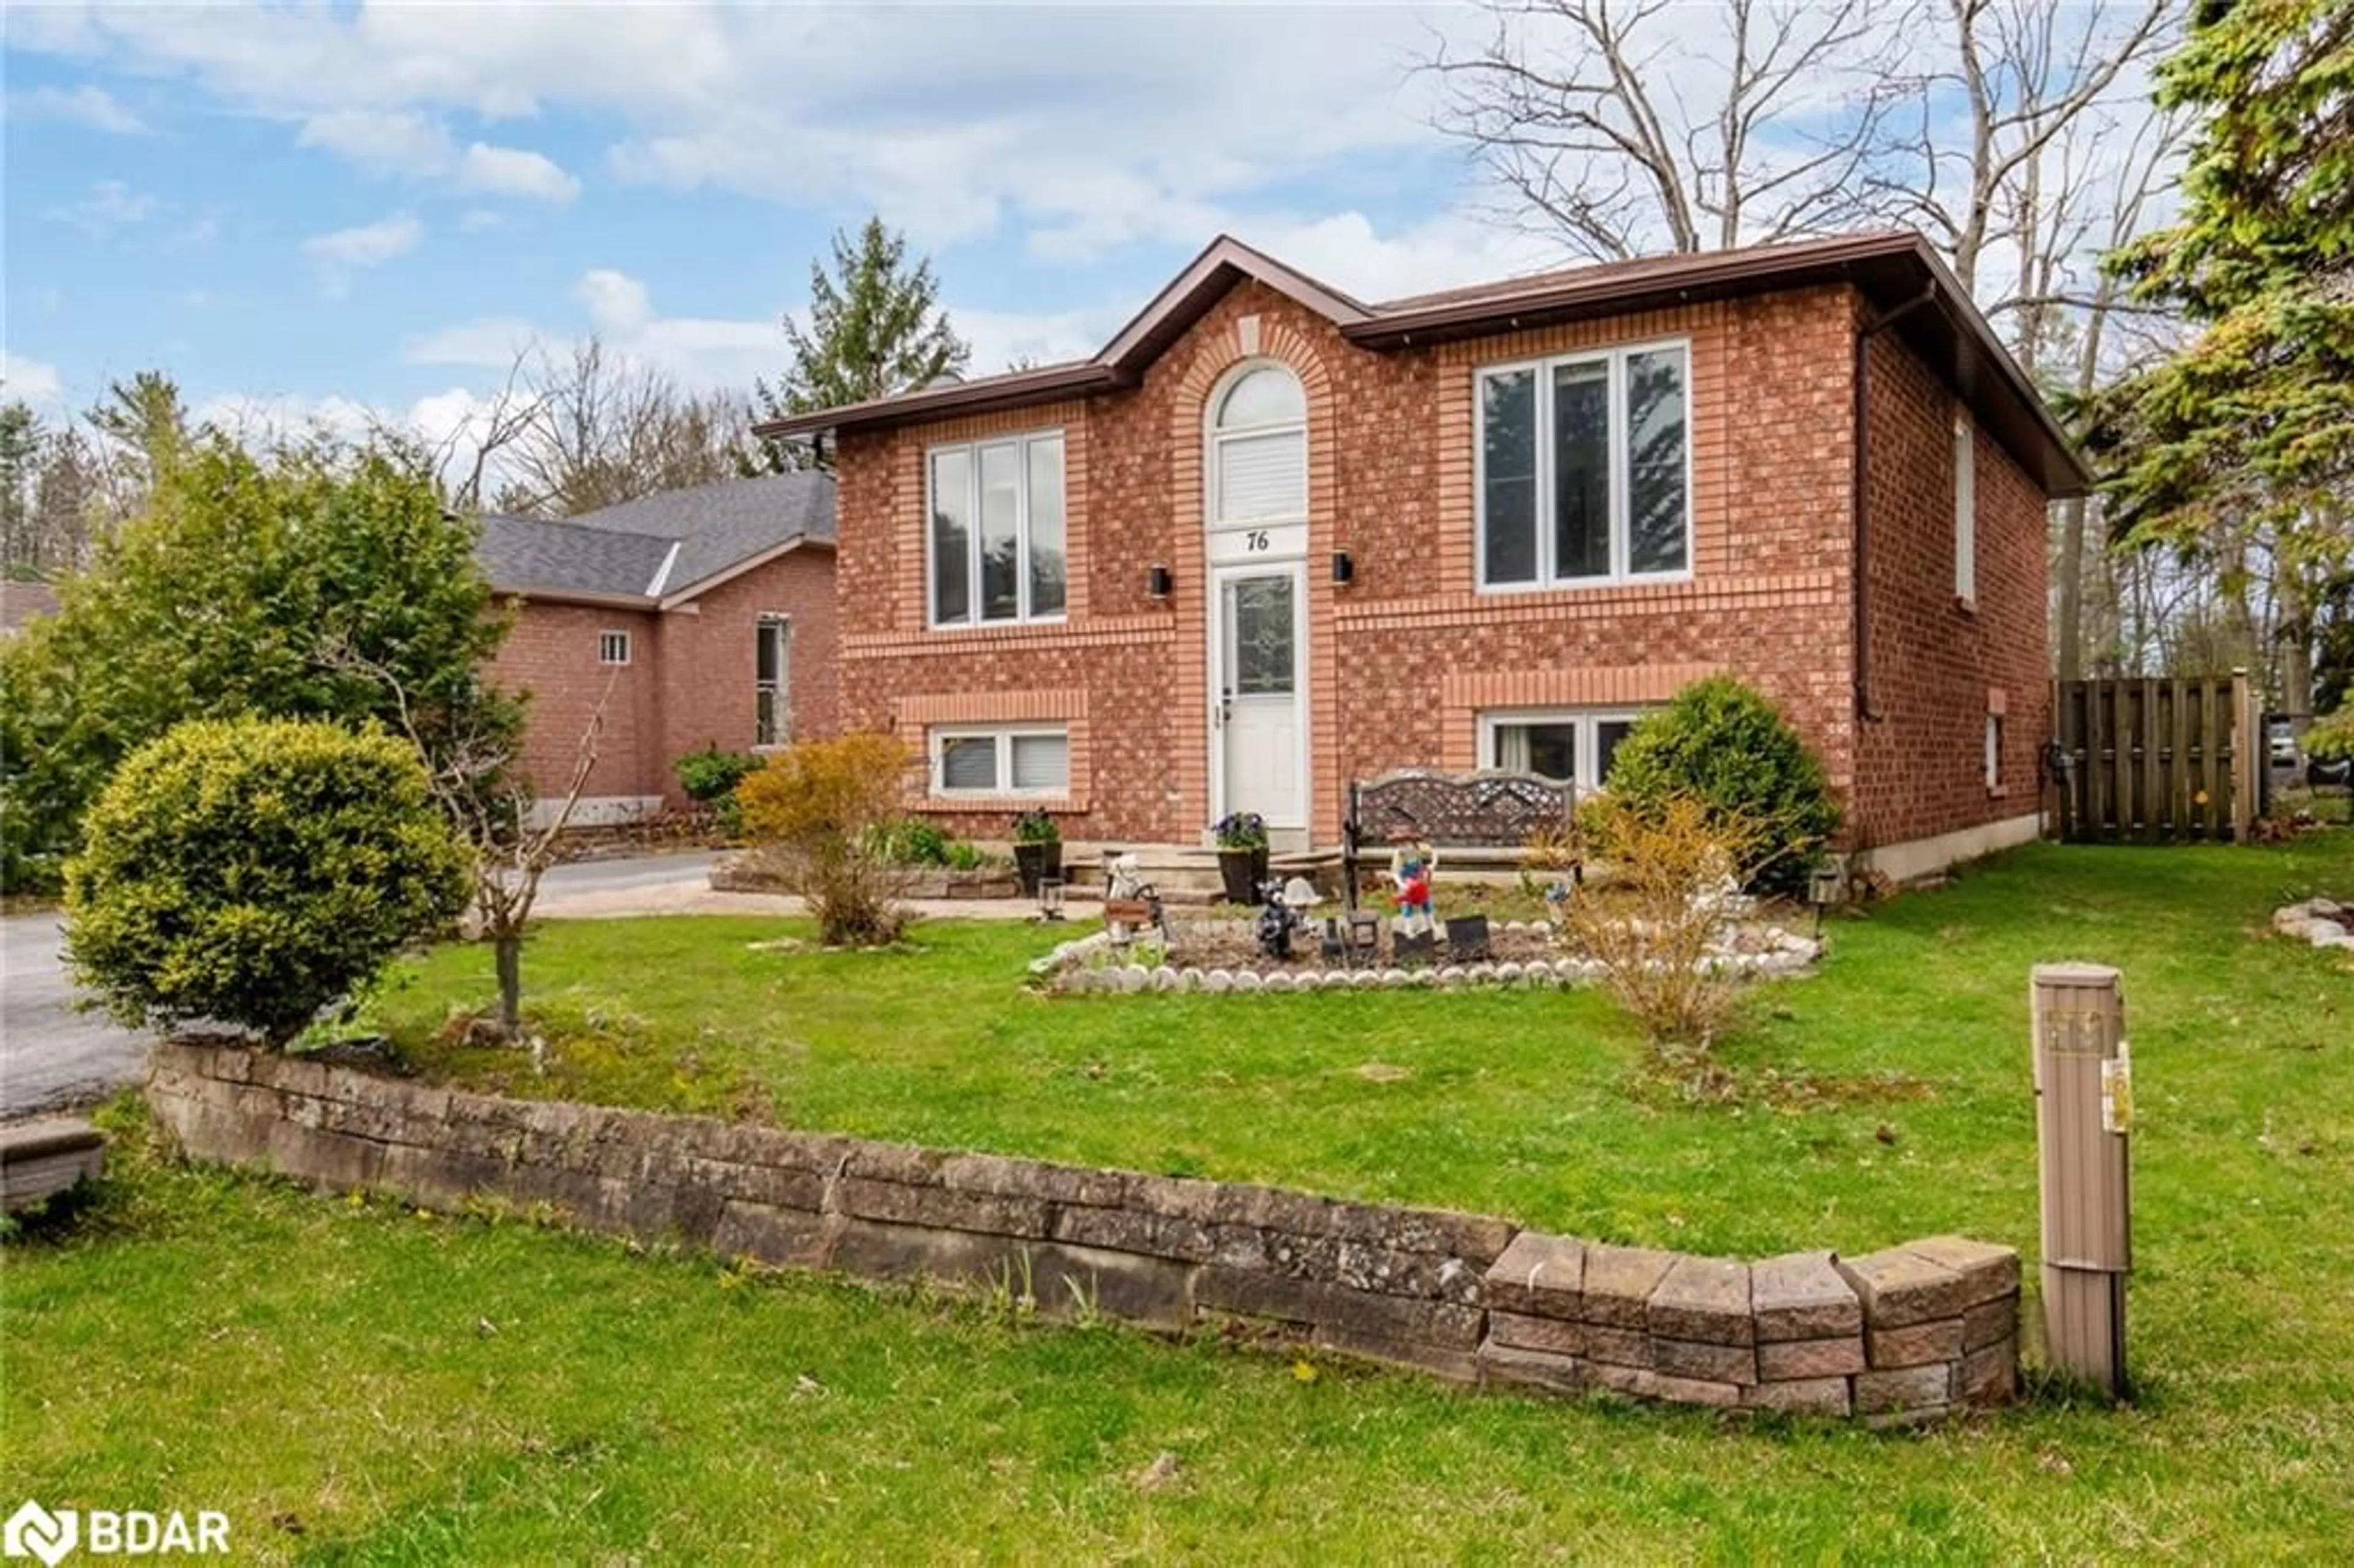 Home with brick exterior material for 76 Leo Blvd, Wasaga Beach Ontario L9Z 1C5